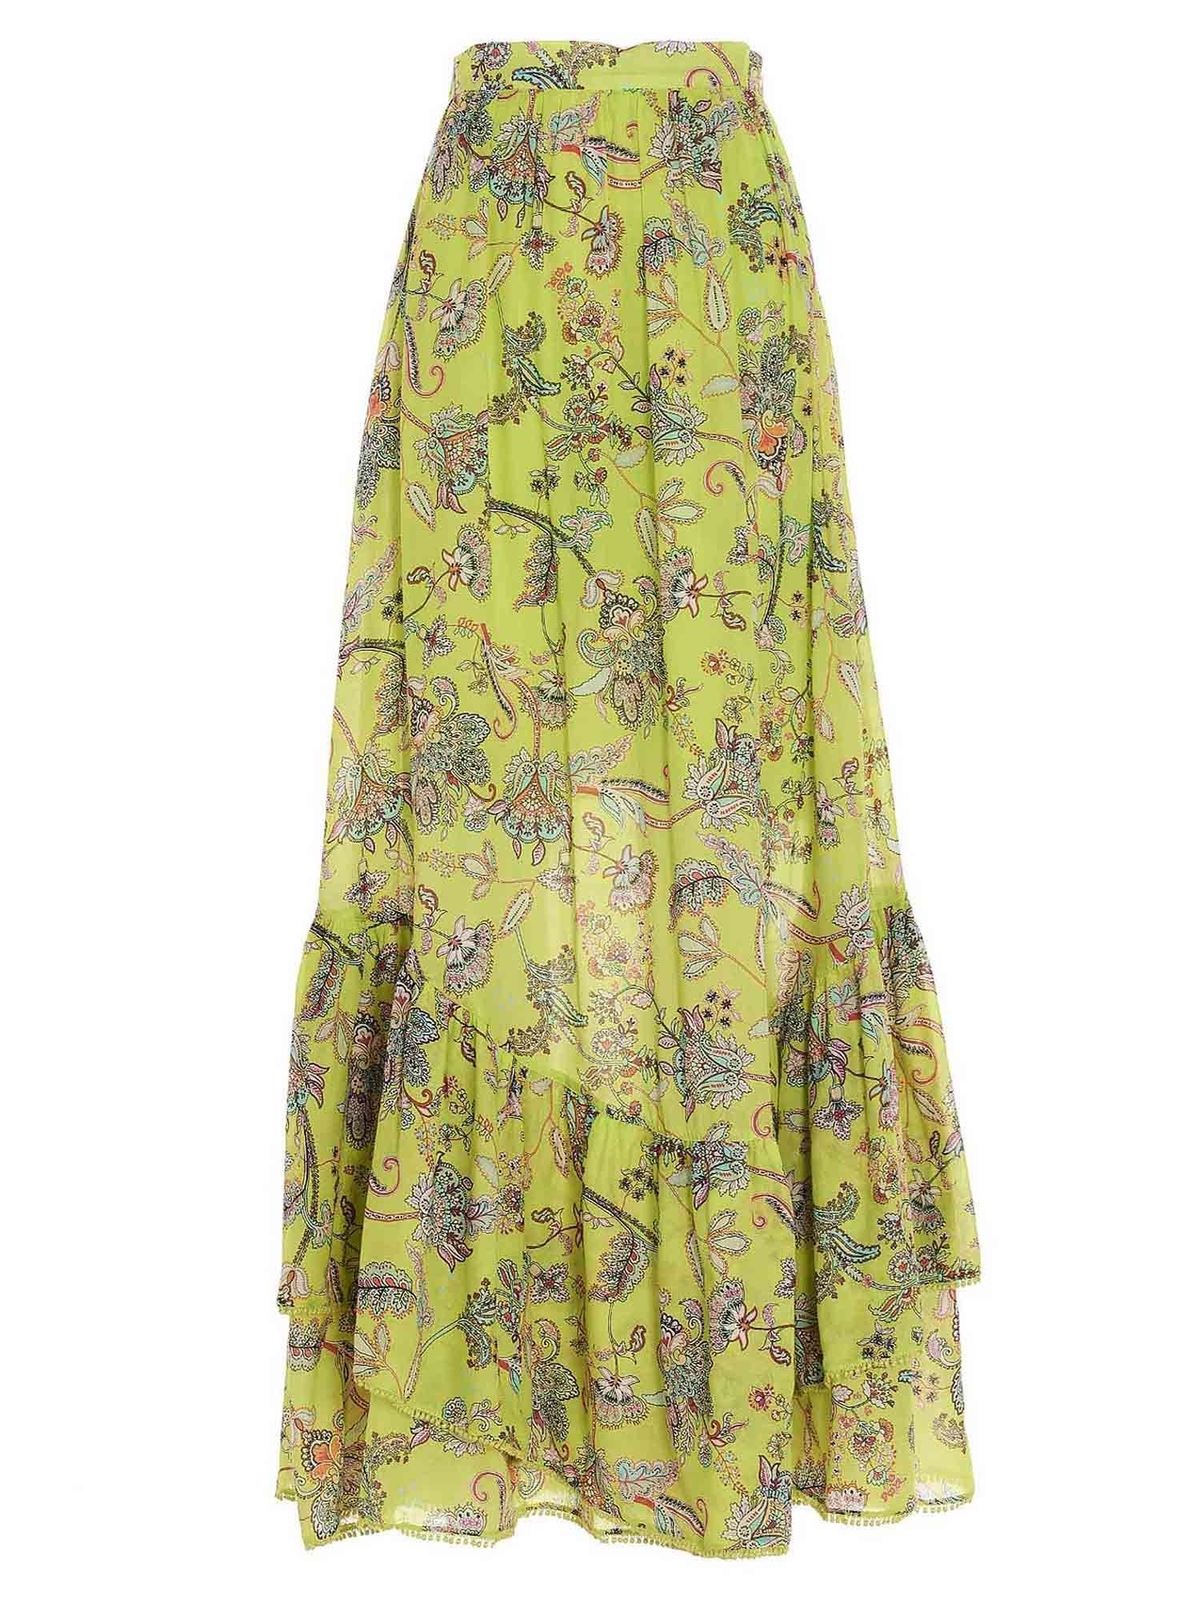 TWINSET INDIAN FLOWER PRINT SKIRT IN LED YELLOW COLOR